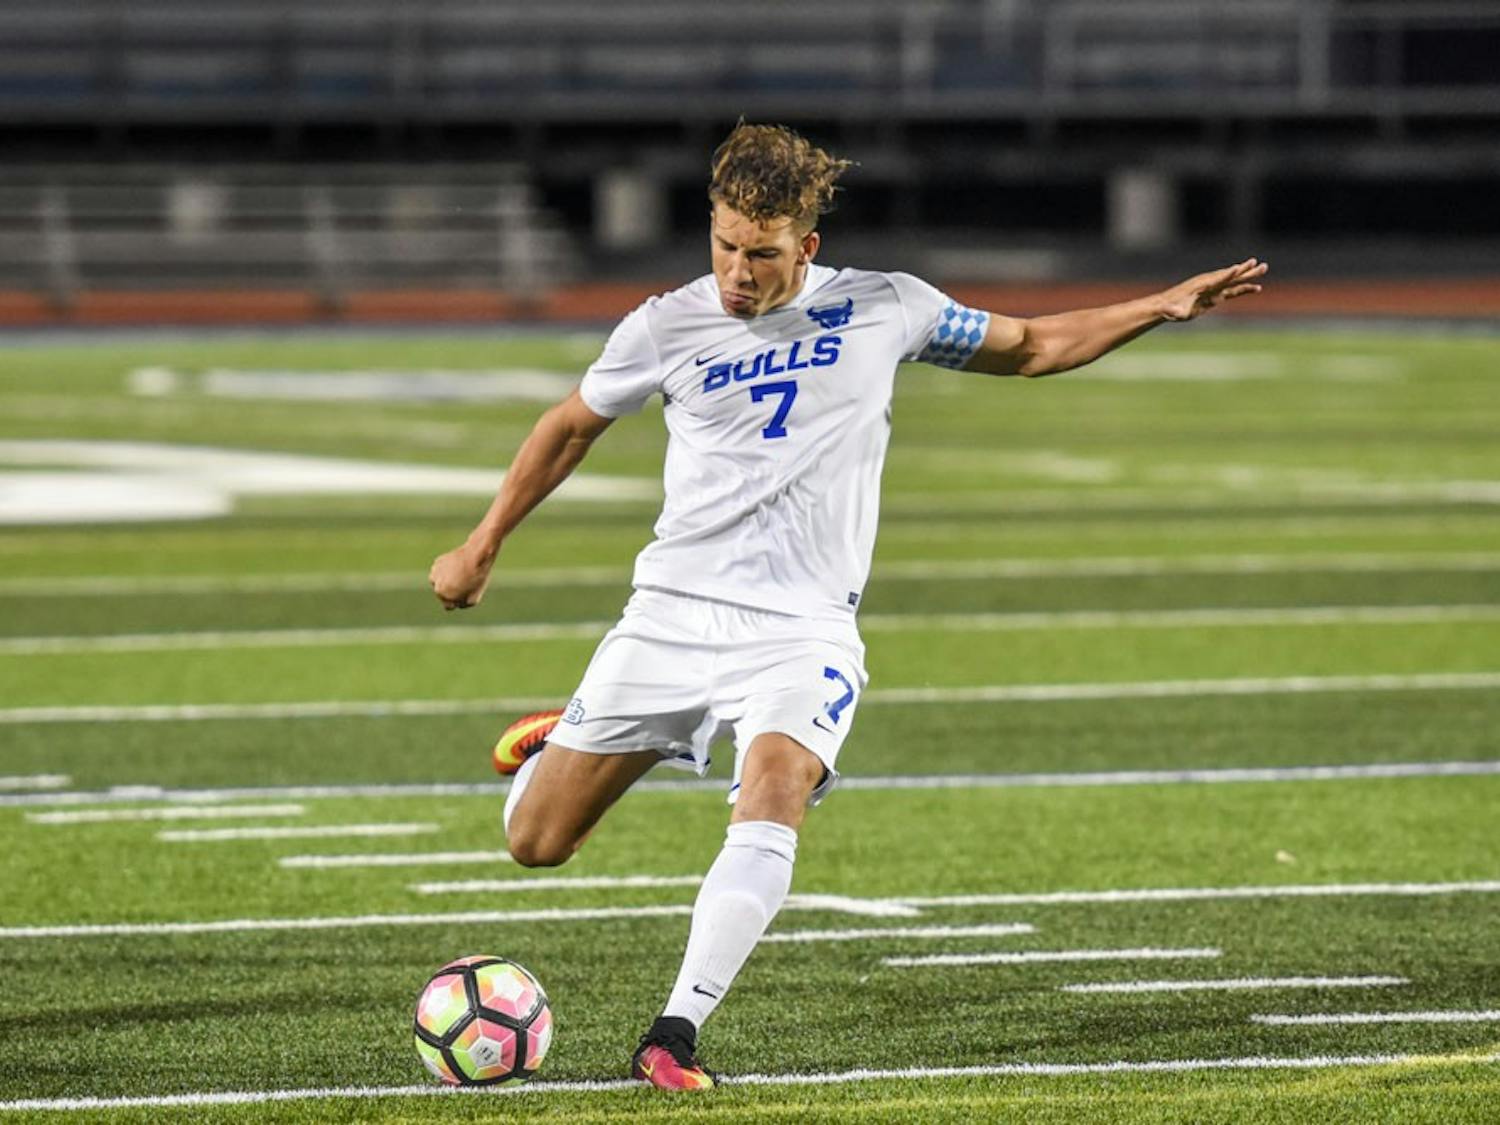 Senior forward&nbsp;Russell Cicerone strikes a free kick at UB Stadium on Sept. 21. His goal and assist helped the men’s soccer team defeat St. Bonaventure 2-1.